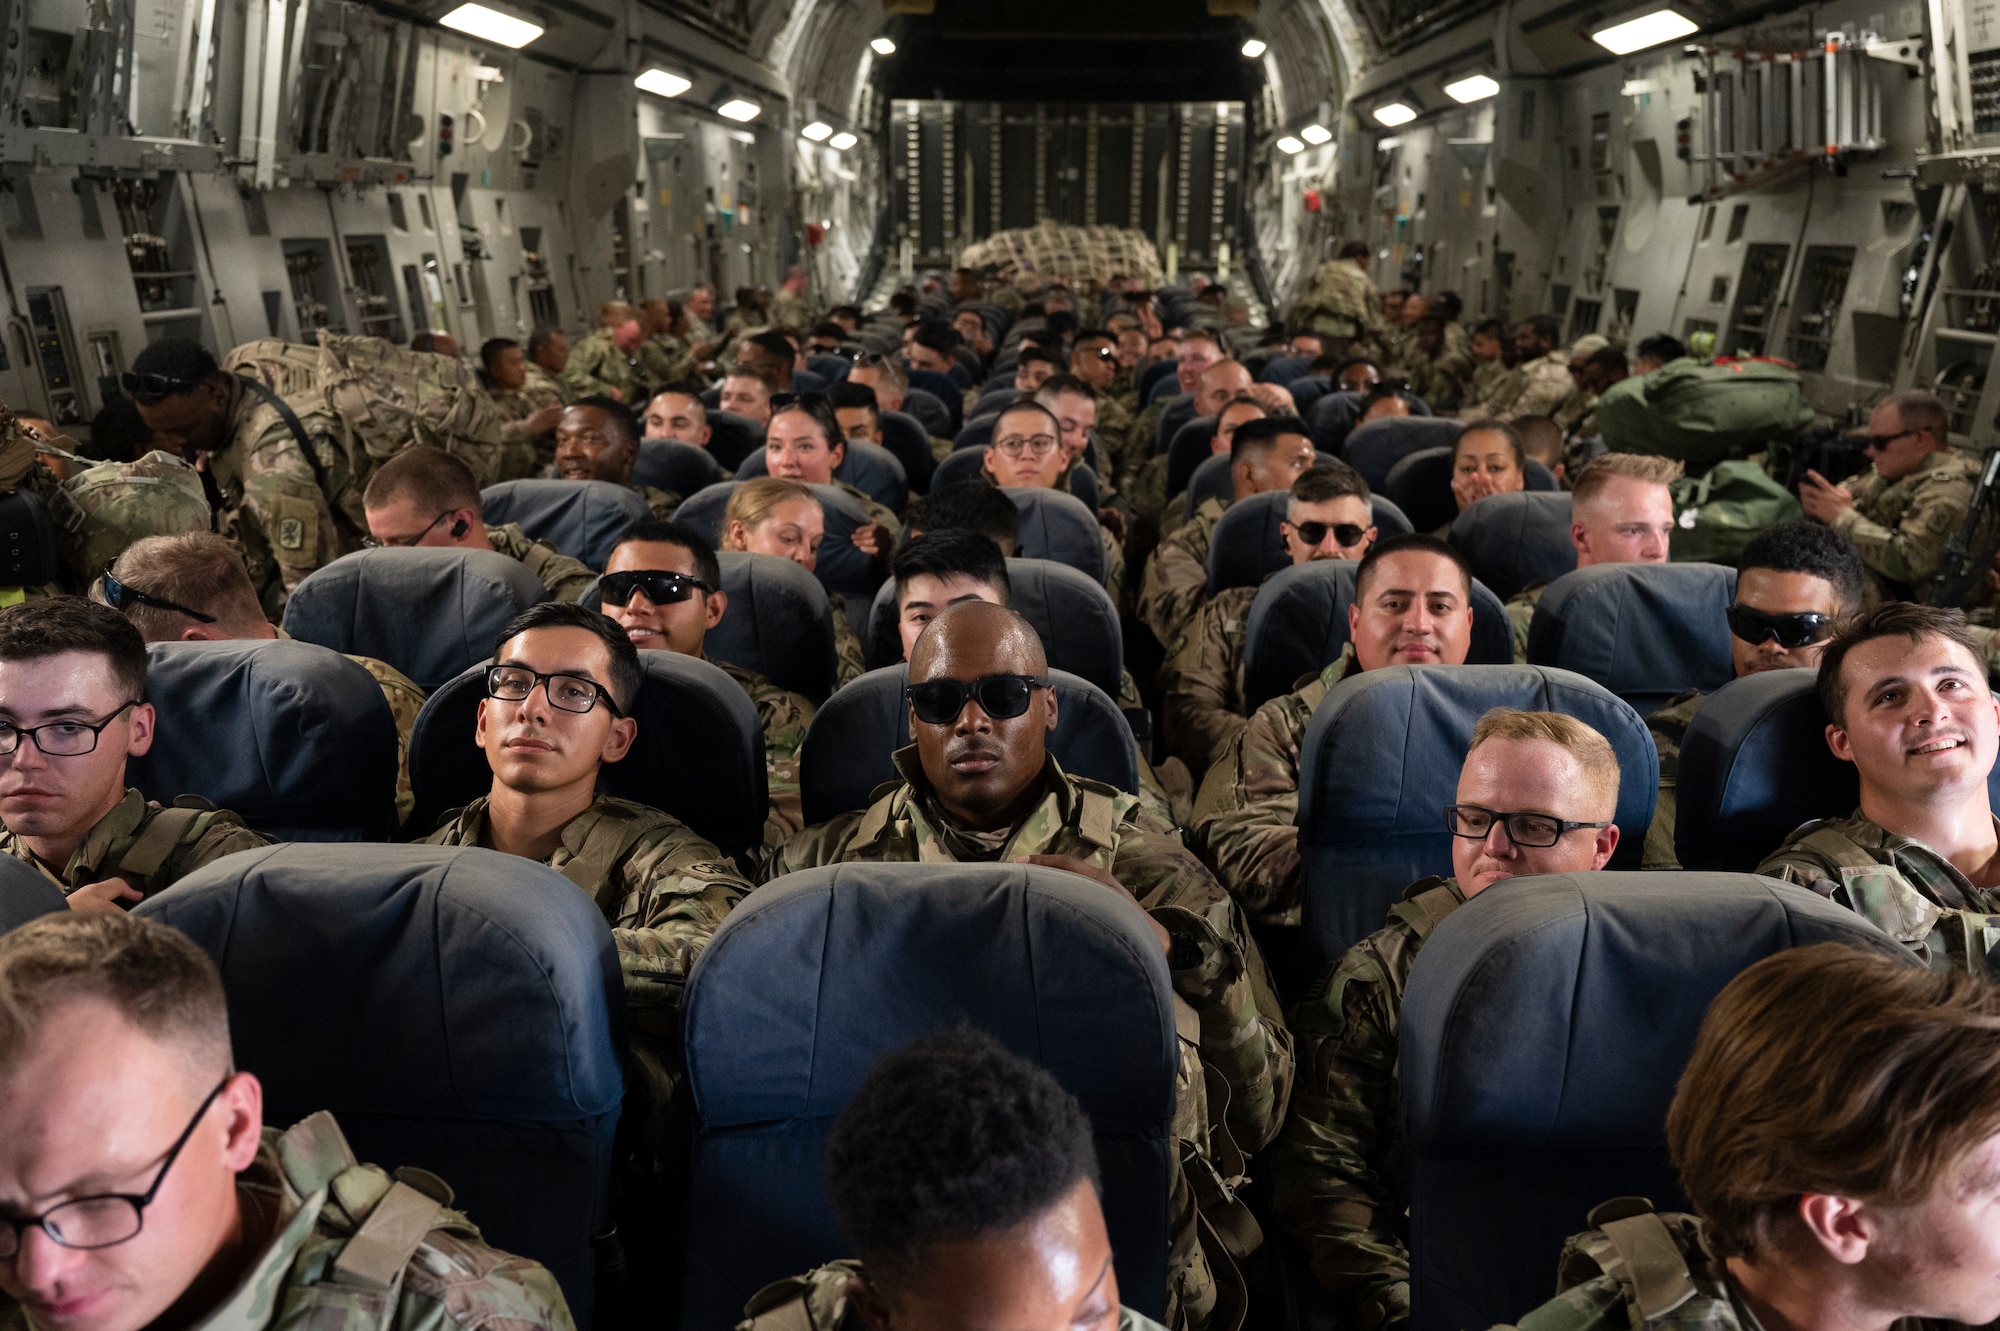 U.S. Army Task Force Griz Soldiers from the 1st Combined Arms Battalion, 163rd Cavalry Regiment, get ready for takeoff aboard a C-17 Globemaster III during an Emergency Deployment Rapid Exercise at Ali Al Salem Air Base, Kuwait, August 10, 2022. This exercise tested the Army and Air Force’s joint capability to put boots on the ground and support the warfighter as quickly as possible through rapid global mobility. (U.S. Air Force photo by Staff Sgt. Dalton Williams)